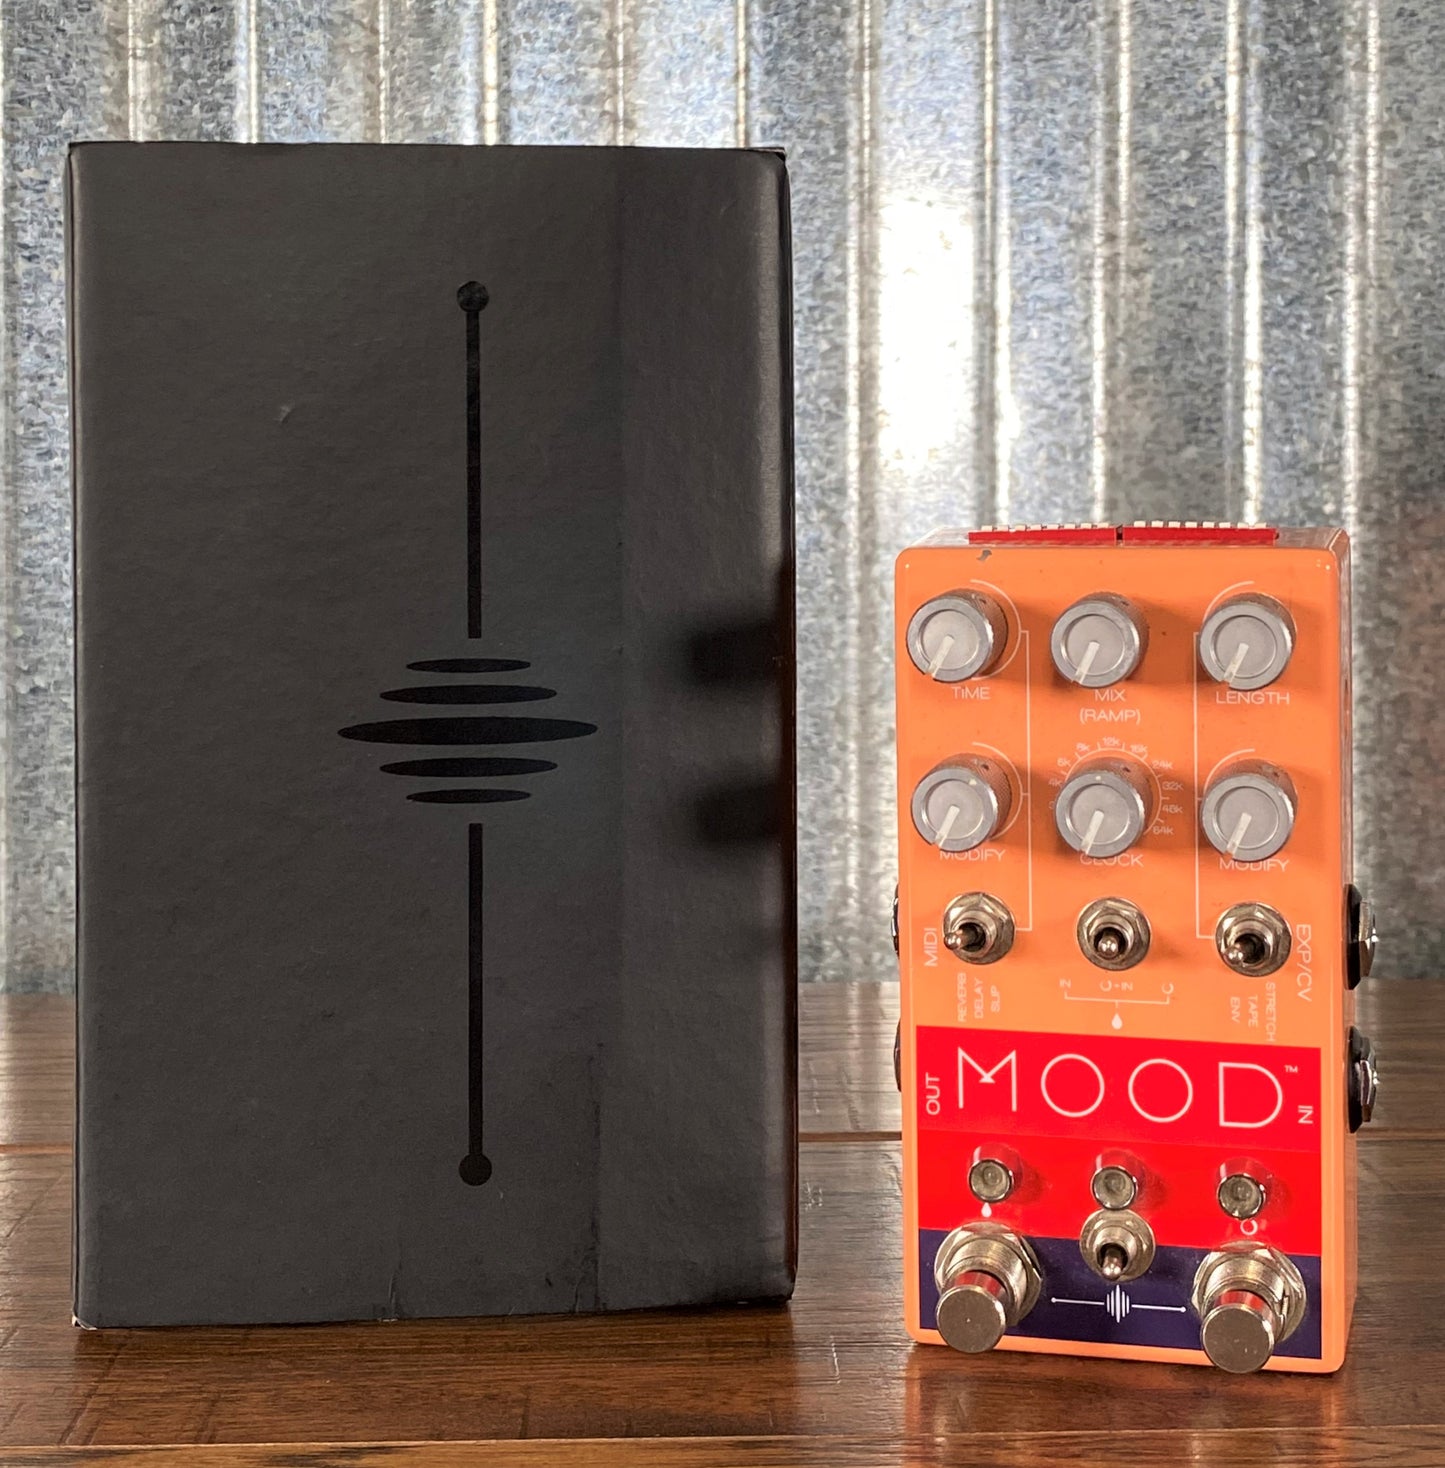 Chase Bliss Audio Mood Looper & Delay Guitar Effect Pedal Used